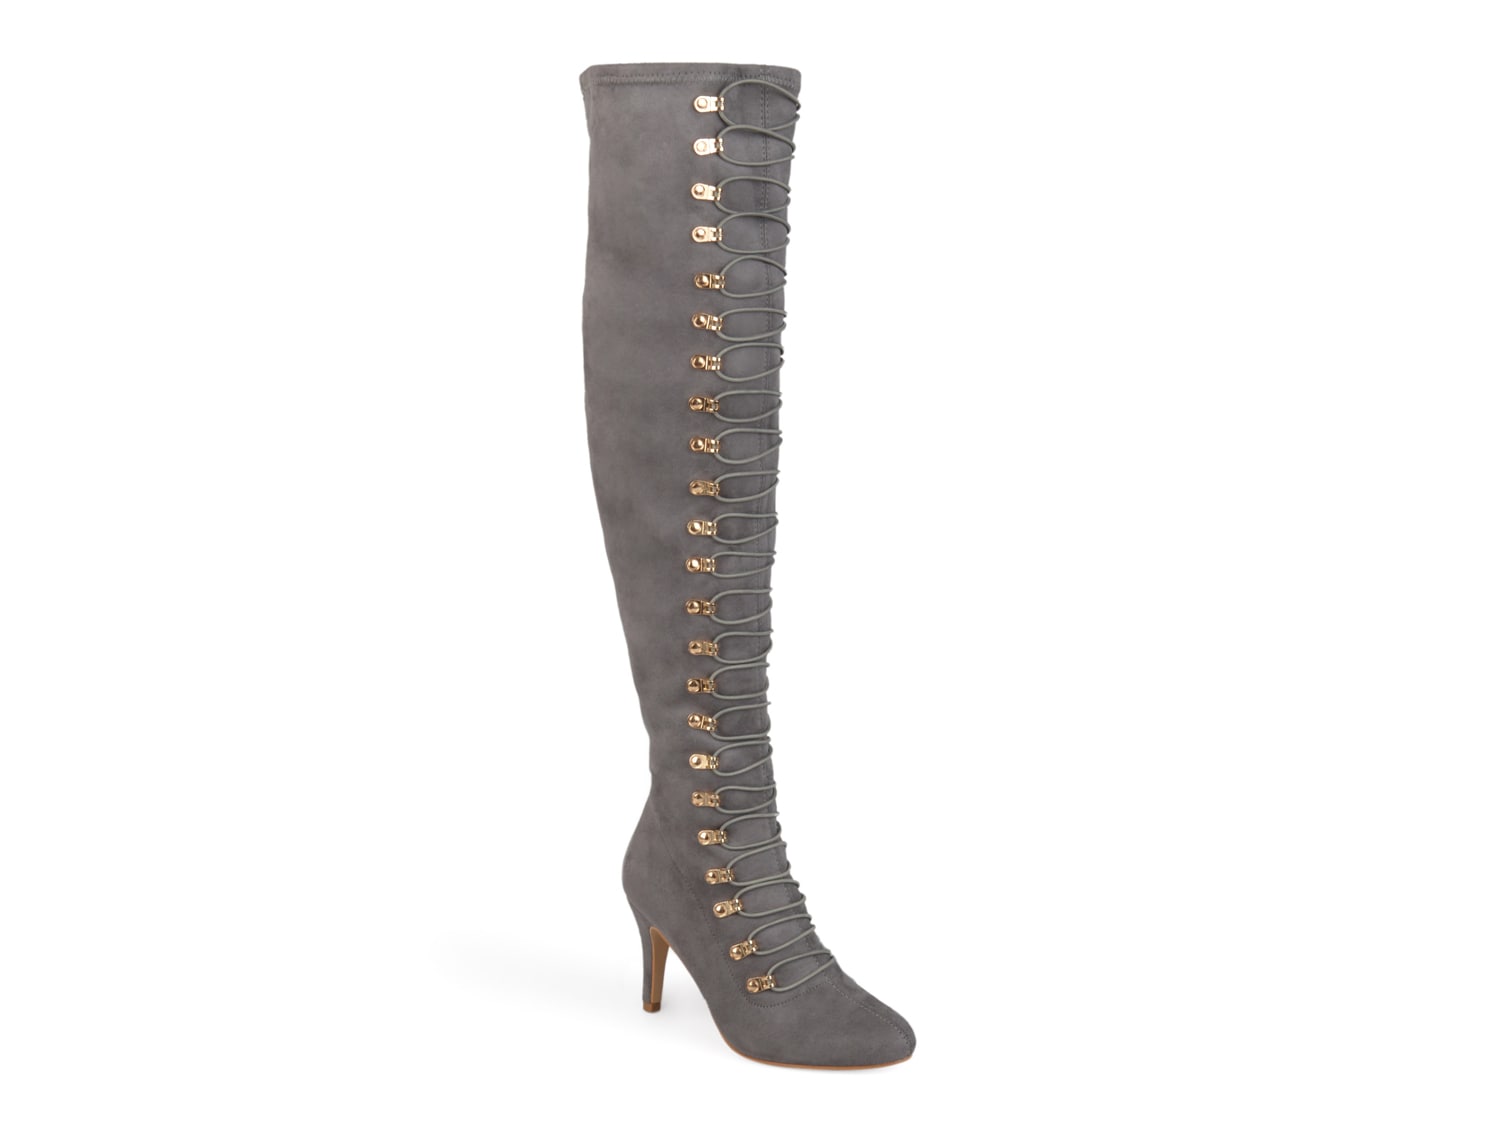 Journee Collection Trill Wide Calf Thigh High Boot - Free Shipping | DSW